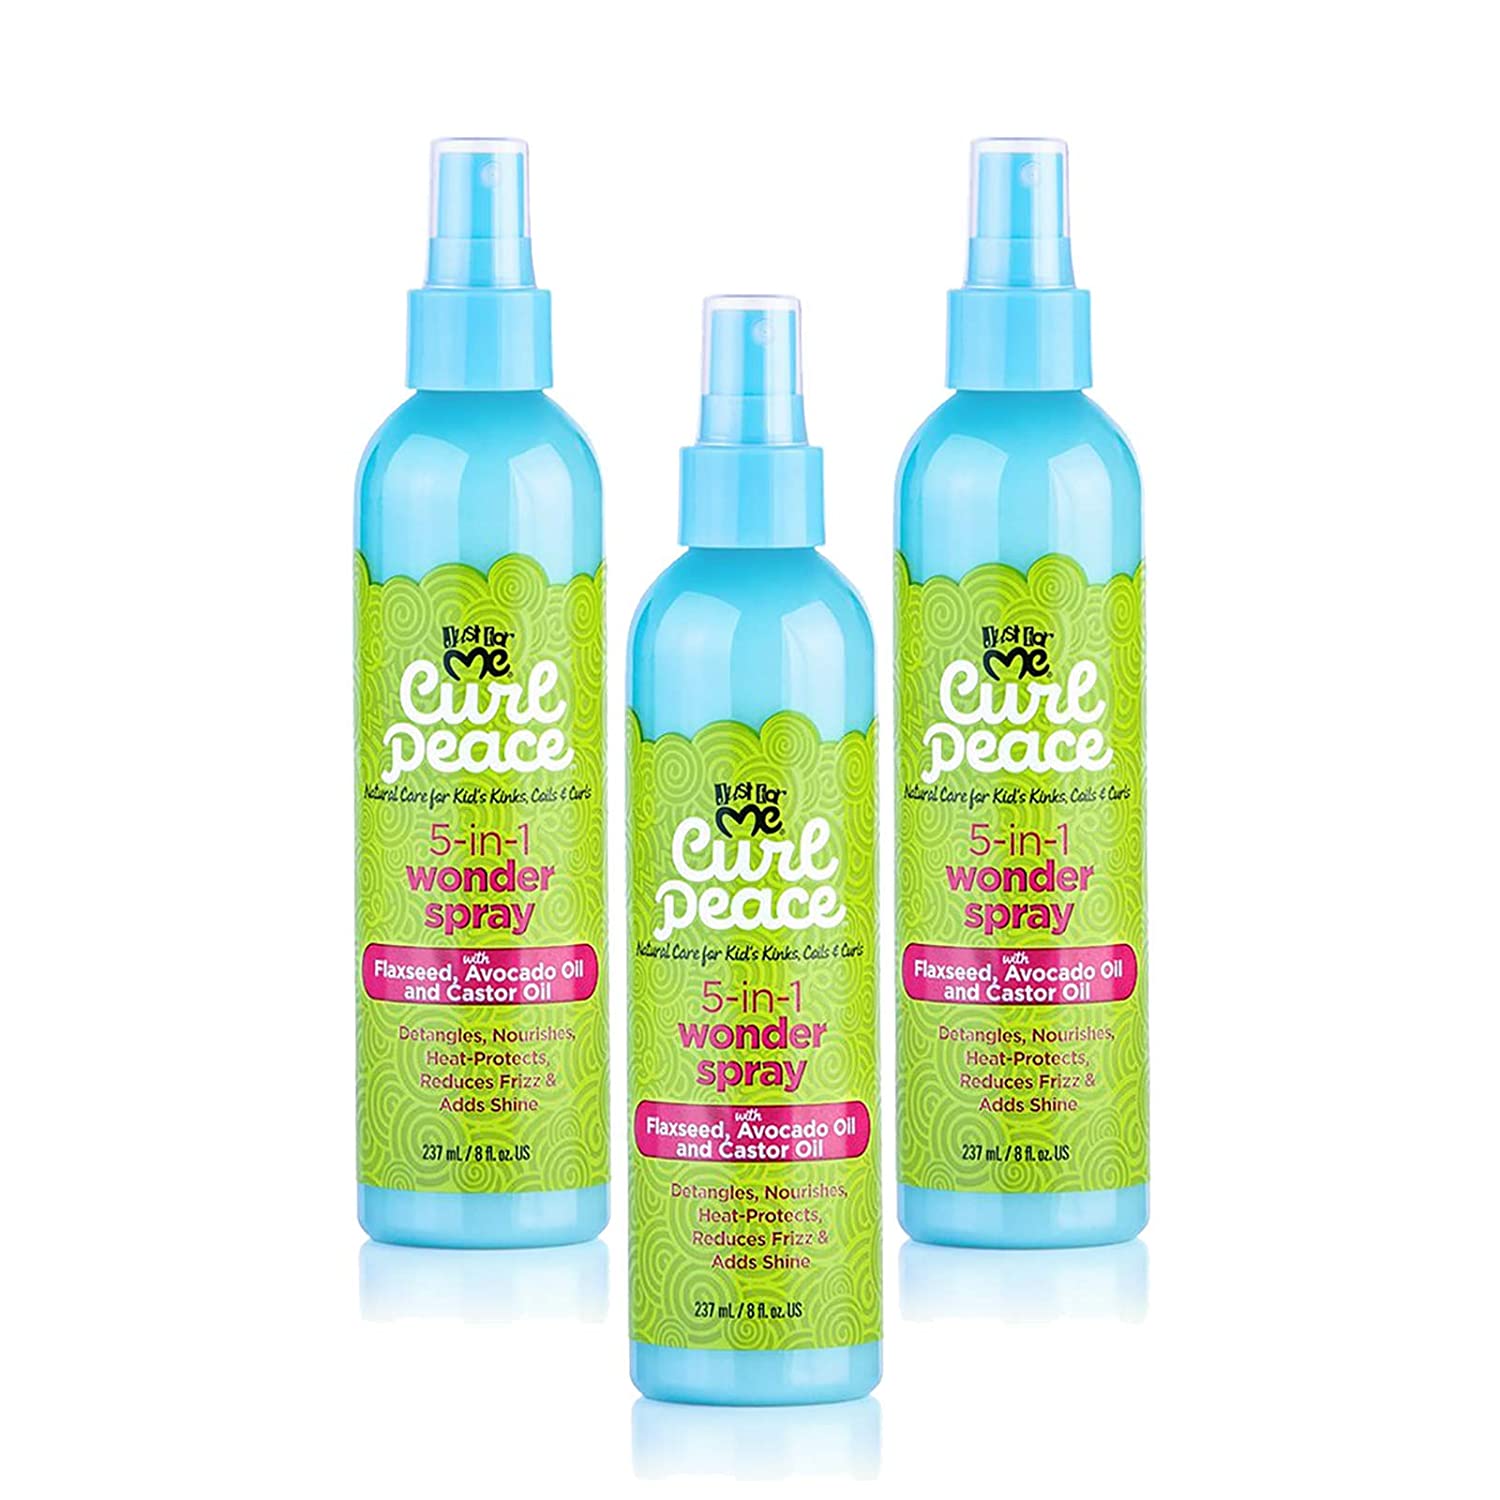 CURL PEACE 5IN1 SPRY 8